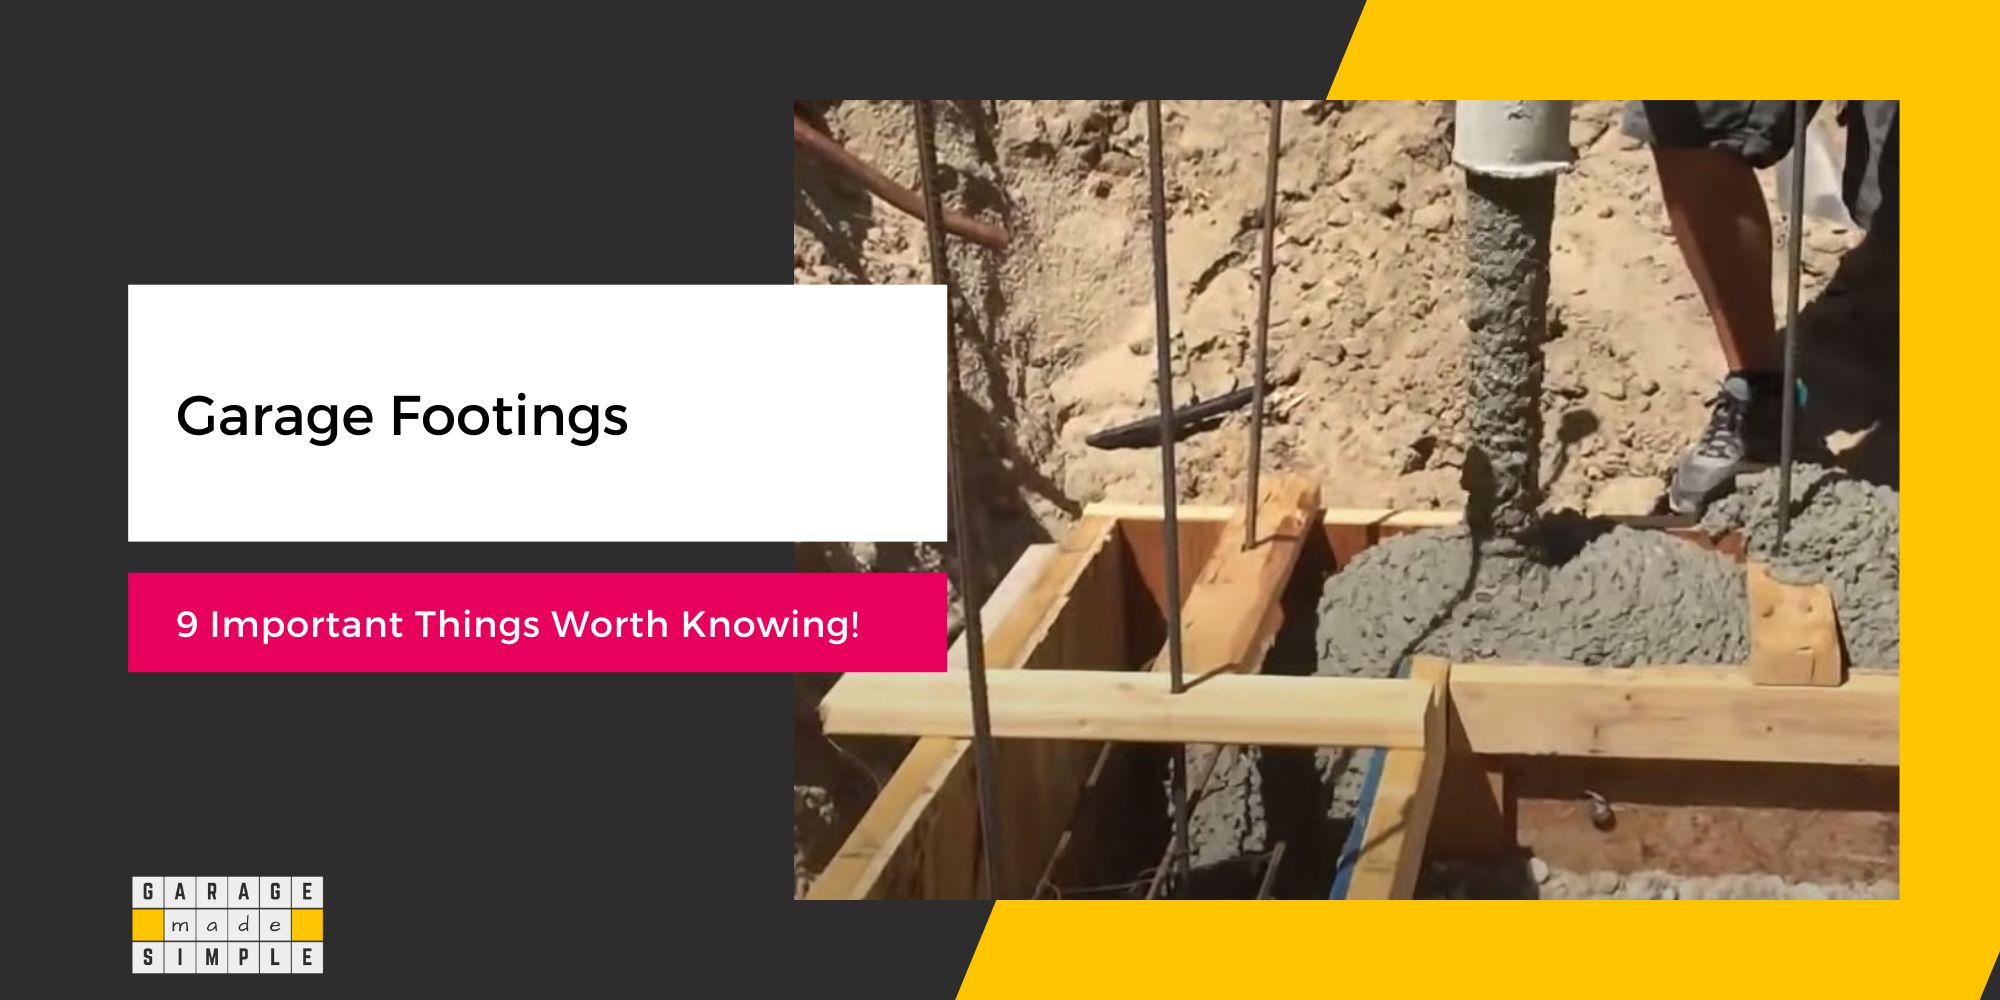 Does a Garage Need Footings or Foundations? (10 Important Things Worth Knowing!)